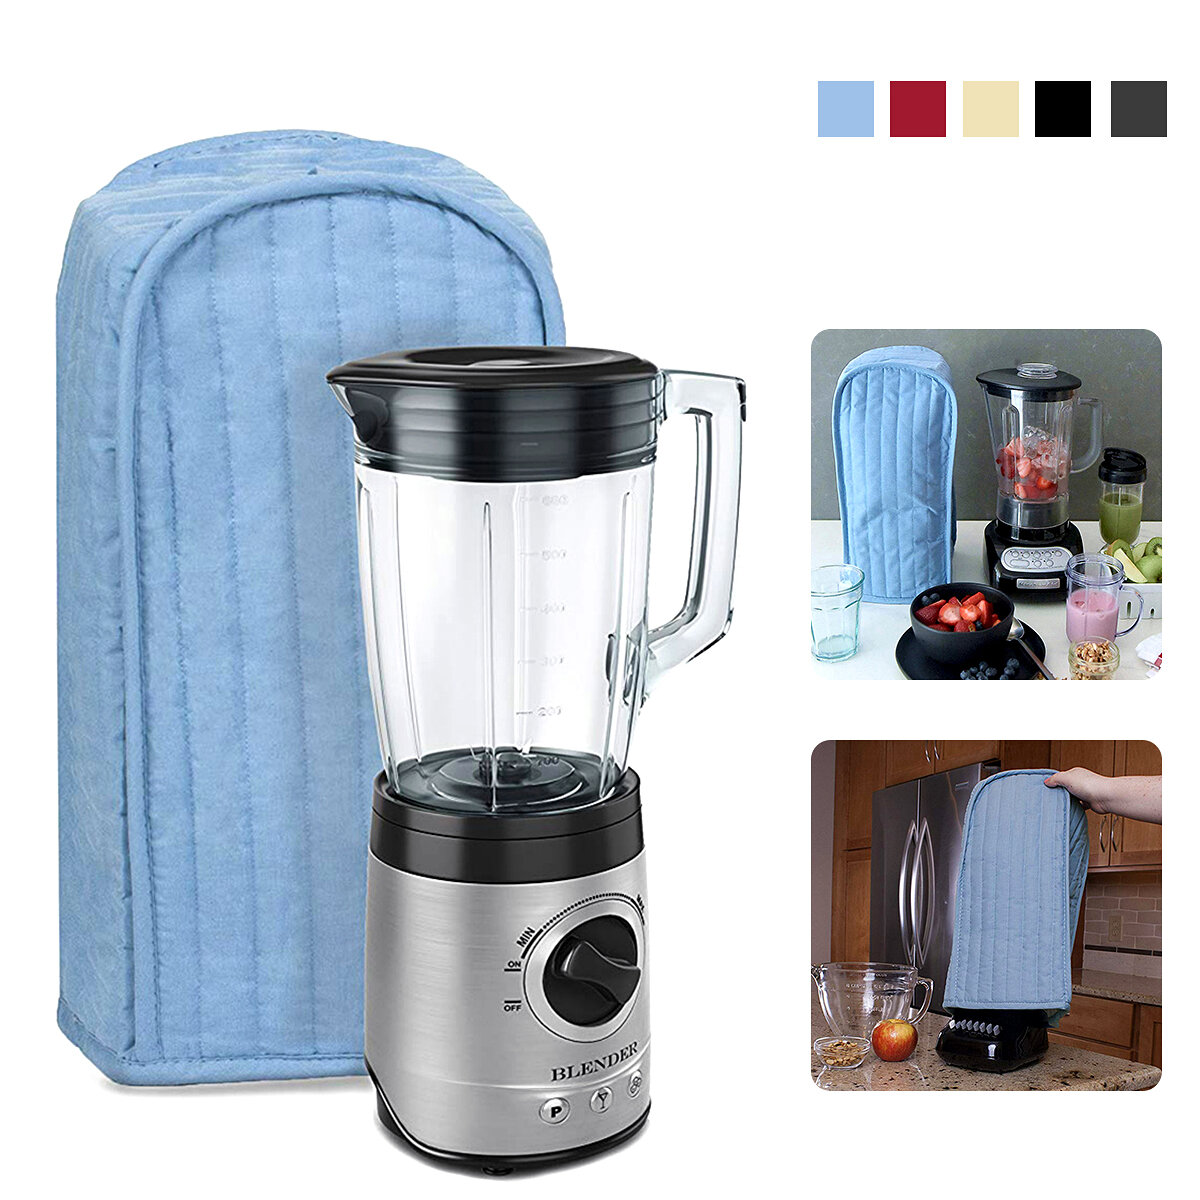 Quilted Polyester Kitchen Blender Appliance Cover Dust-proof Protection Case Bag